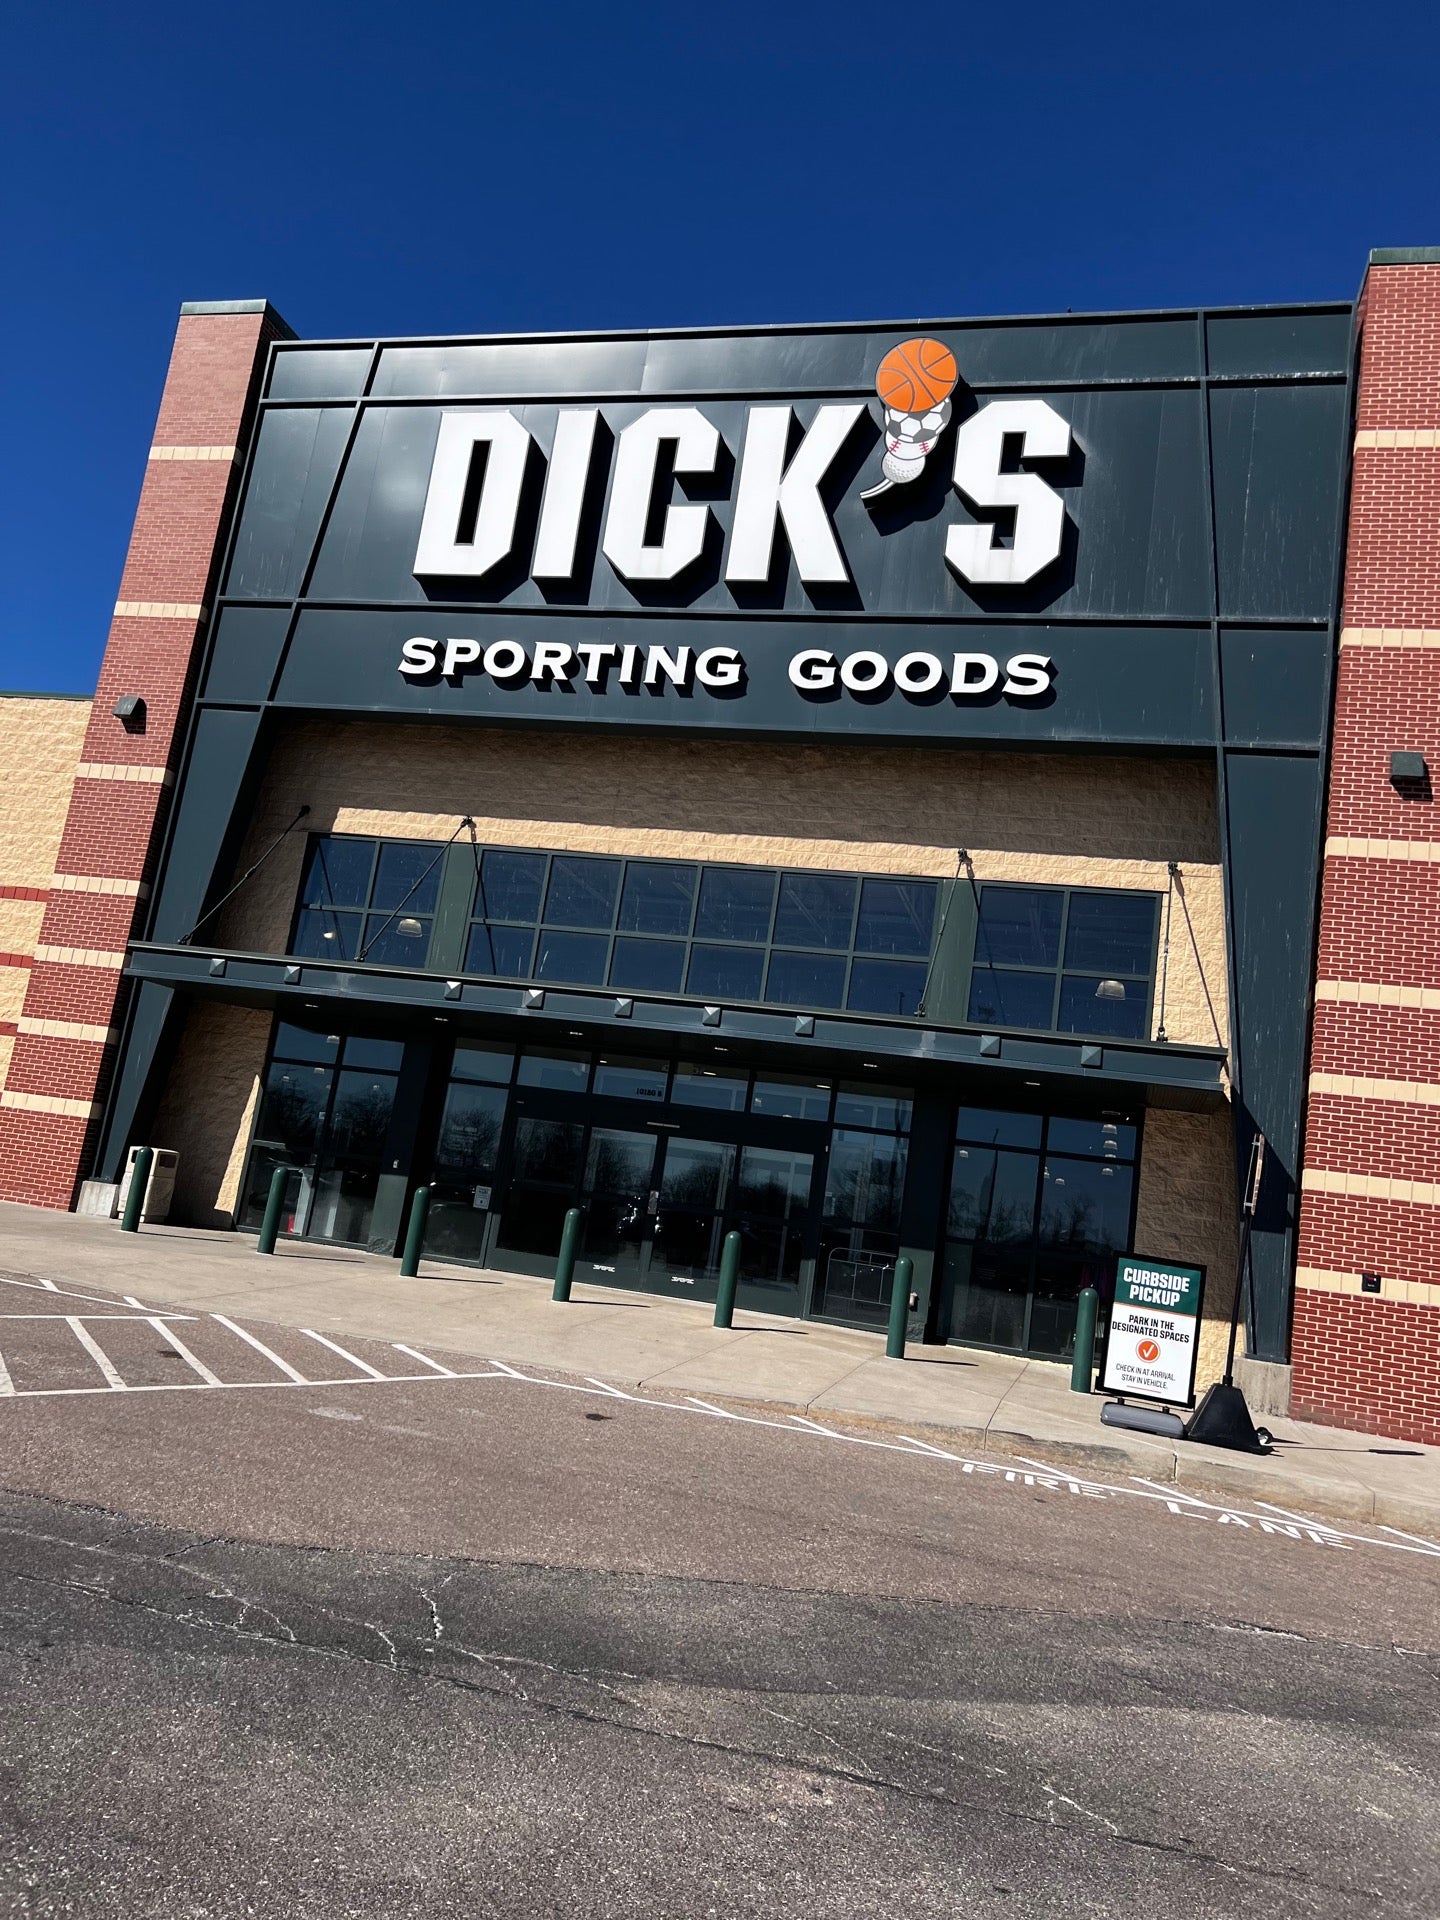 ASICS Shoes & Apparel  Curbside Pickup Available at DICK'S